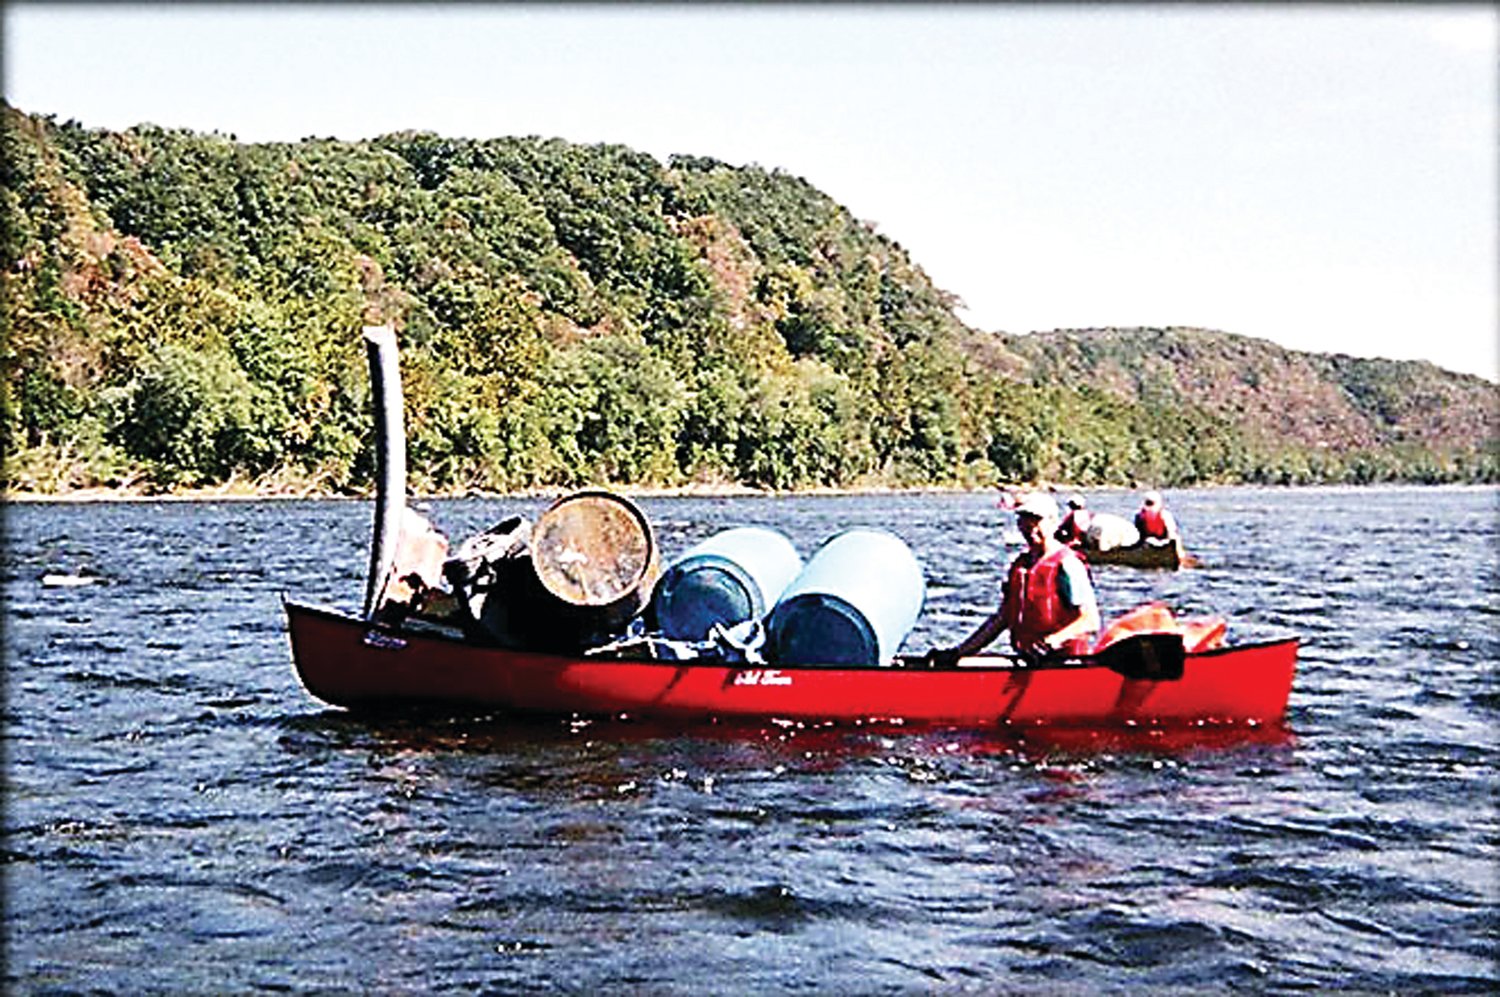 A canoe carries debri discovered in last year’s river cleanup.